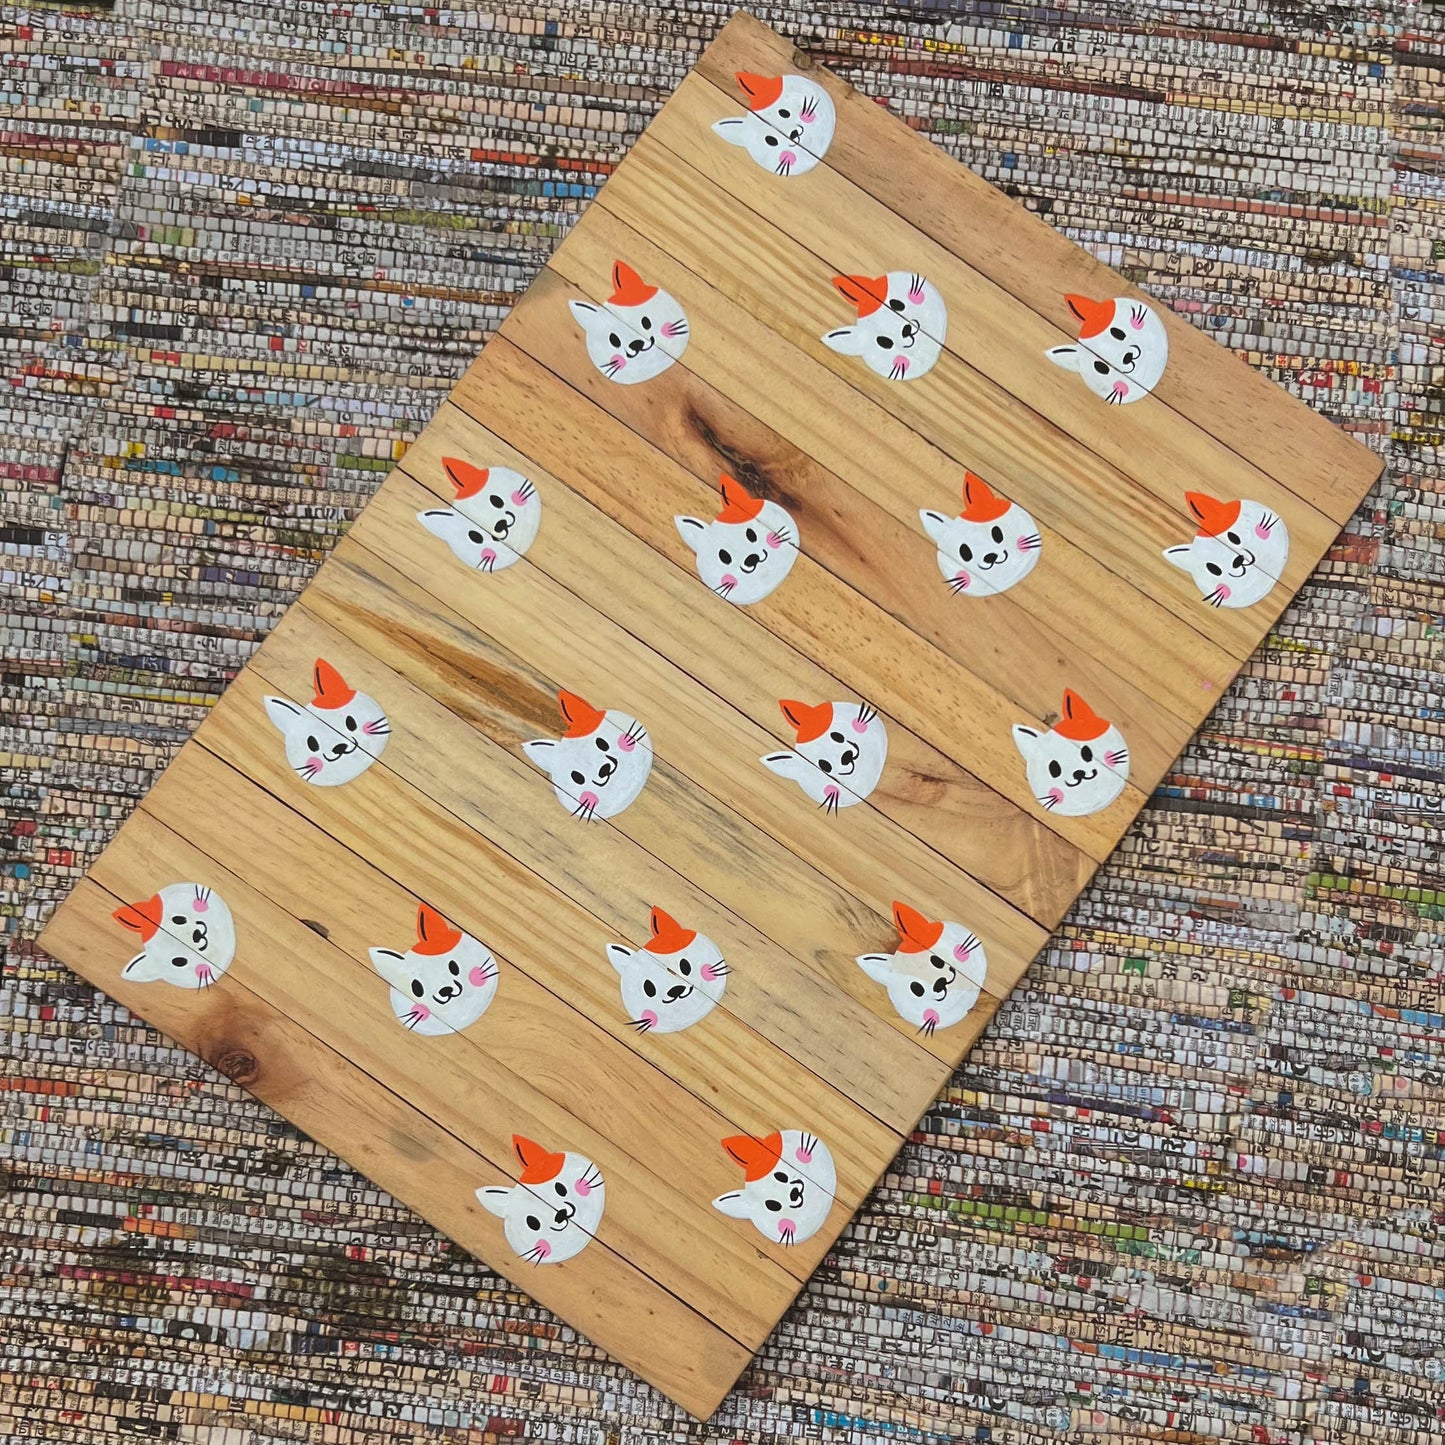 Cute Catty Place Mat | Multipurpose | Natural Reclaimed Wood | Foldable | Stain-Proof | Scrapshala